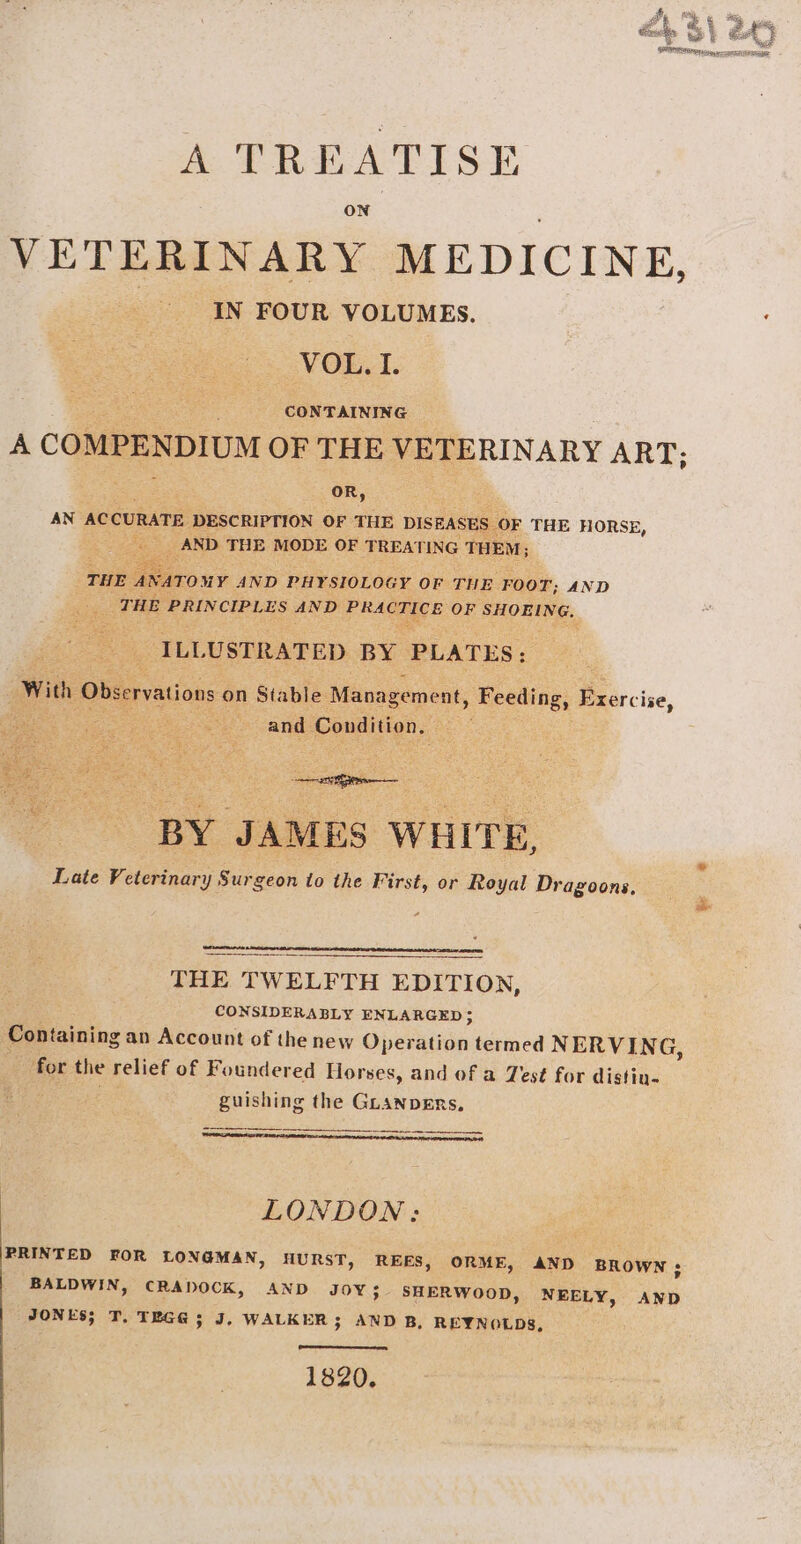 A TREATISE ON VETERINARY MEDICINE, IN FOUR VOLUMES. VOL. I. CONTAINING A COMPENDIUM OF THE VETERINARY ART, oR, AN ACCURATE DESCRIPTION OF THE DISEASES OF THE HORSE, AND THE MODE OF TREATING THEM; THE ANATOMY AND PHYSIOLOGY OF THE FOOT; AND THE PRINCIPLES AND PRACTICE OF SHOEING. ILLUSTRATED BY PLATES: With Observations on Stable Management, Feeding, Exercise, and Condition, BY JAMES WHITE, Late Veterinary Surgeon to the First, or Royal Dragoons, eerie, THE TWELFTH EDITION, CONSIDERABLY ENLARGED; Containing an Account of the new Gpoaten termed NERVING, for the relief of Foundered Horses, and of a Zest for distiu- guishing the GLANDERs. Sesion penne tnmnea eee ee wore eres 6 LONDON: | PRINTED FOR LONGMAN, HURST, REES, ORME, AND BROWN ; BALDWIN, CRADOCK, AND JOY; SHERWooD, NEELY, JONES; T, TEGG ; J, WALKER; AND B, REYNOLDS, AND 1820,